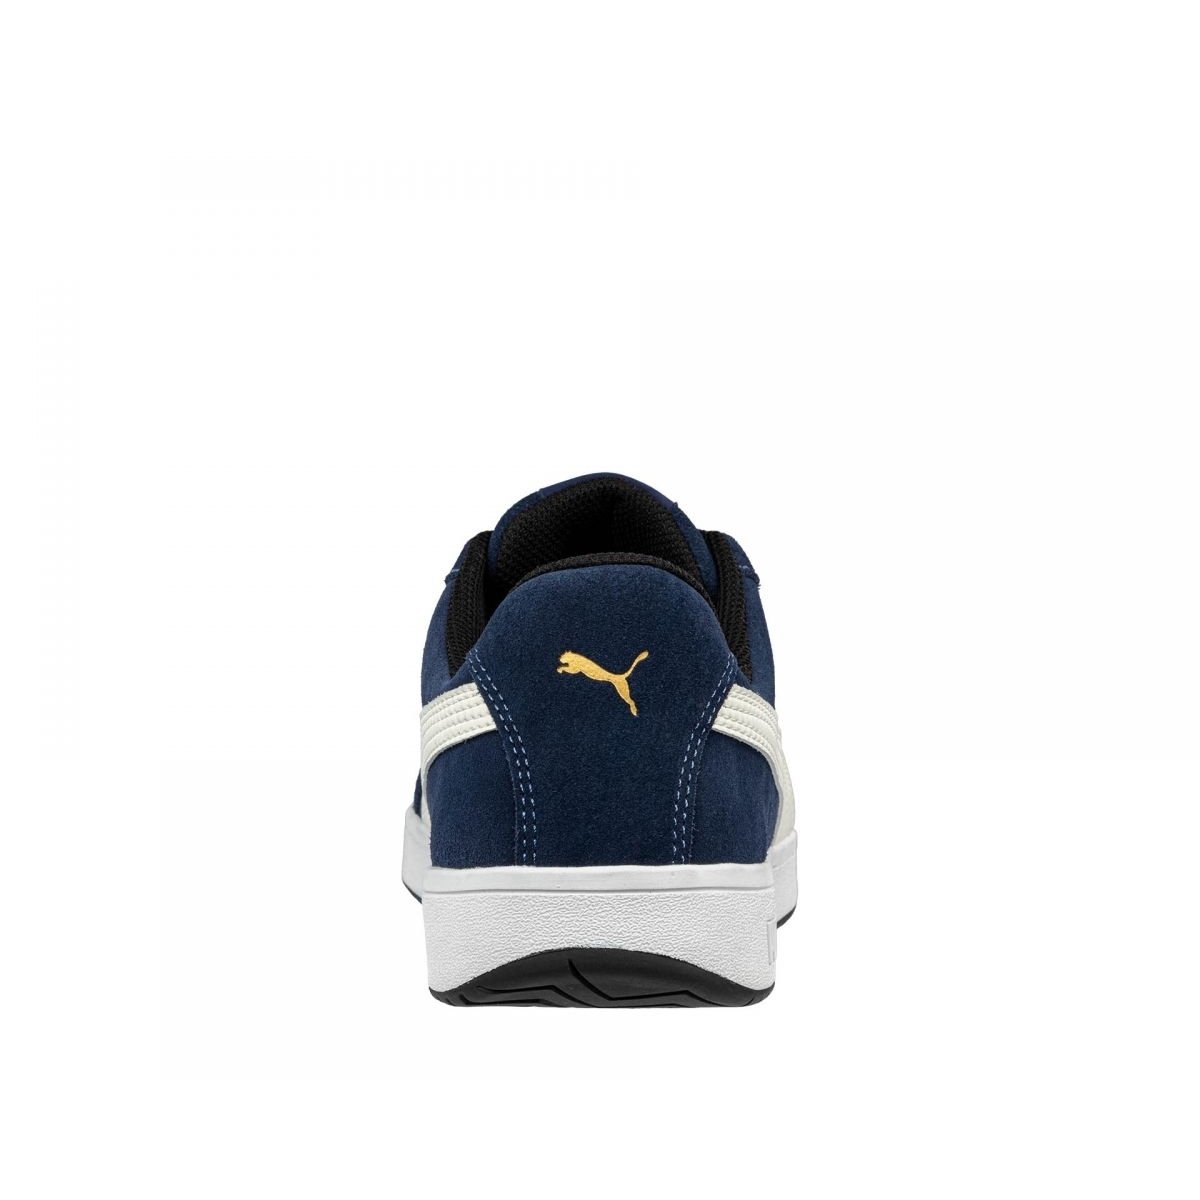 PUMA Safety Men's Iconic Low Composite Toe EH Work Shoes Navy Suede - 640025 ONE SIZE Navy - Navy, 11.5